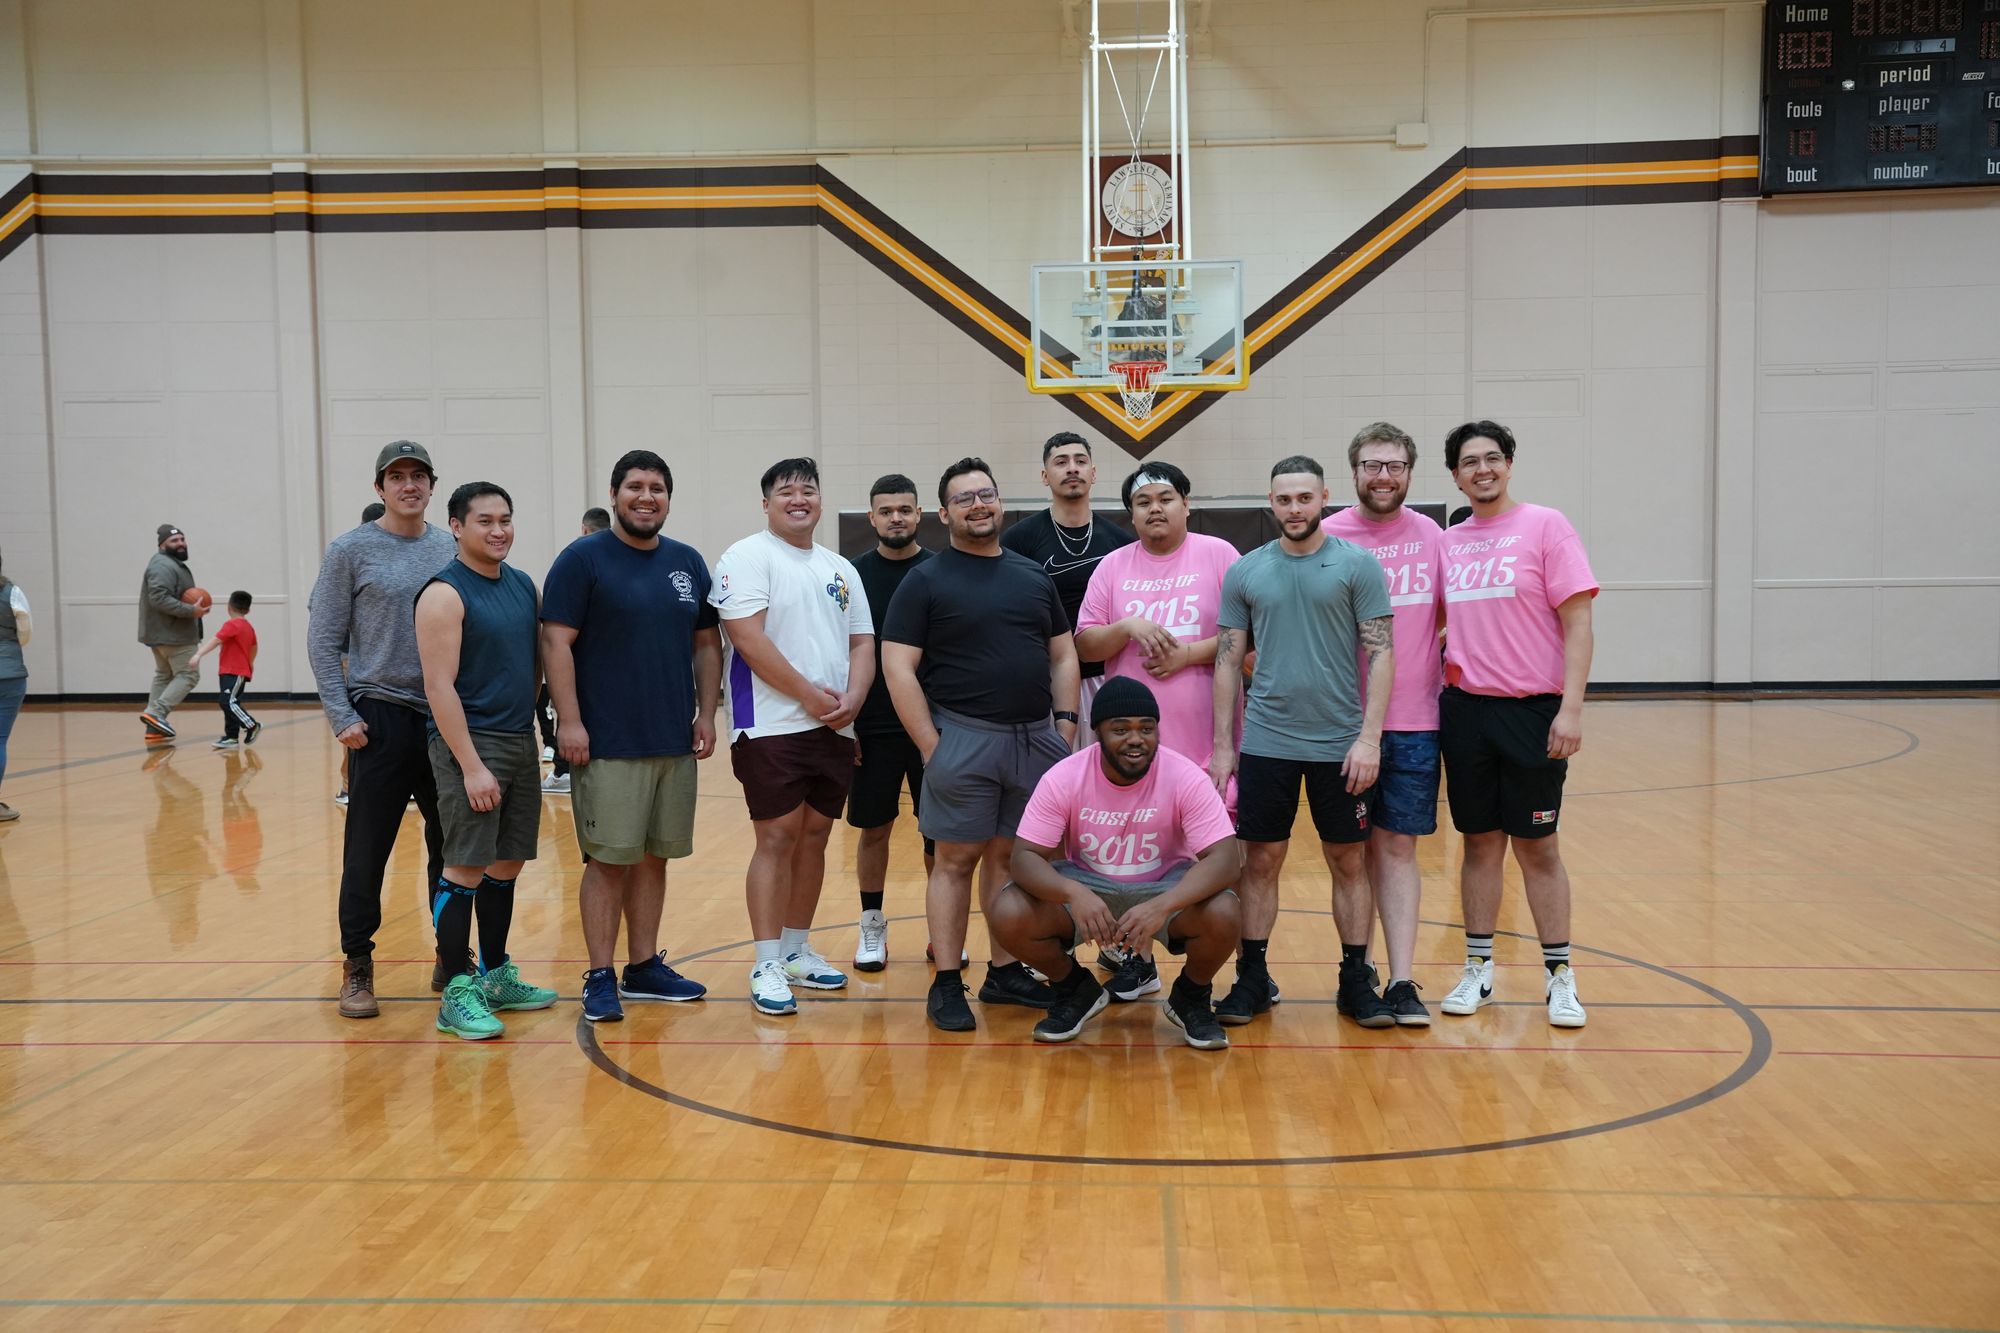 Alumni pose at center court of the gym during the 3-on-3 basketball tournament.